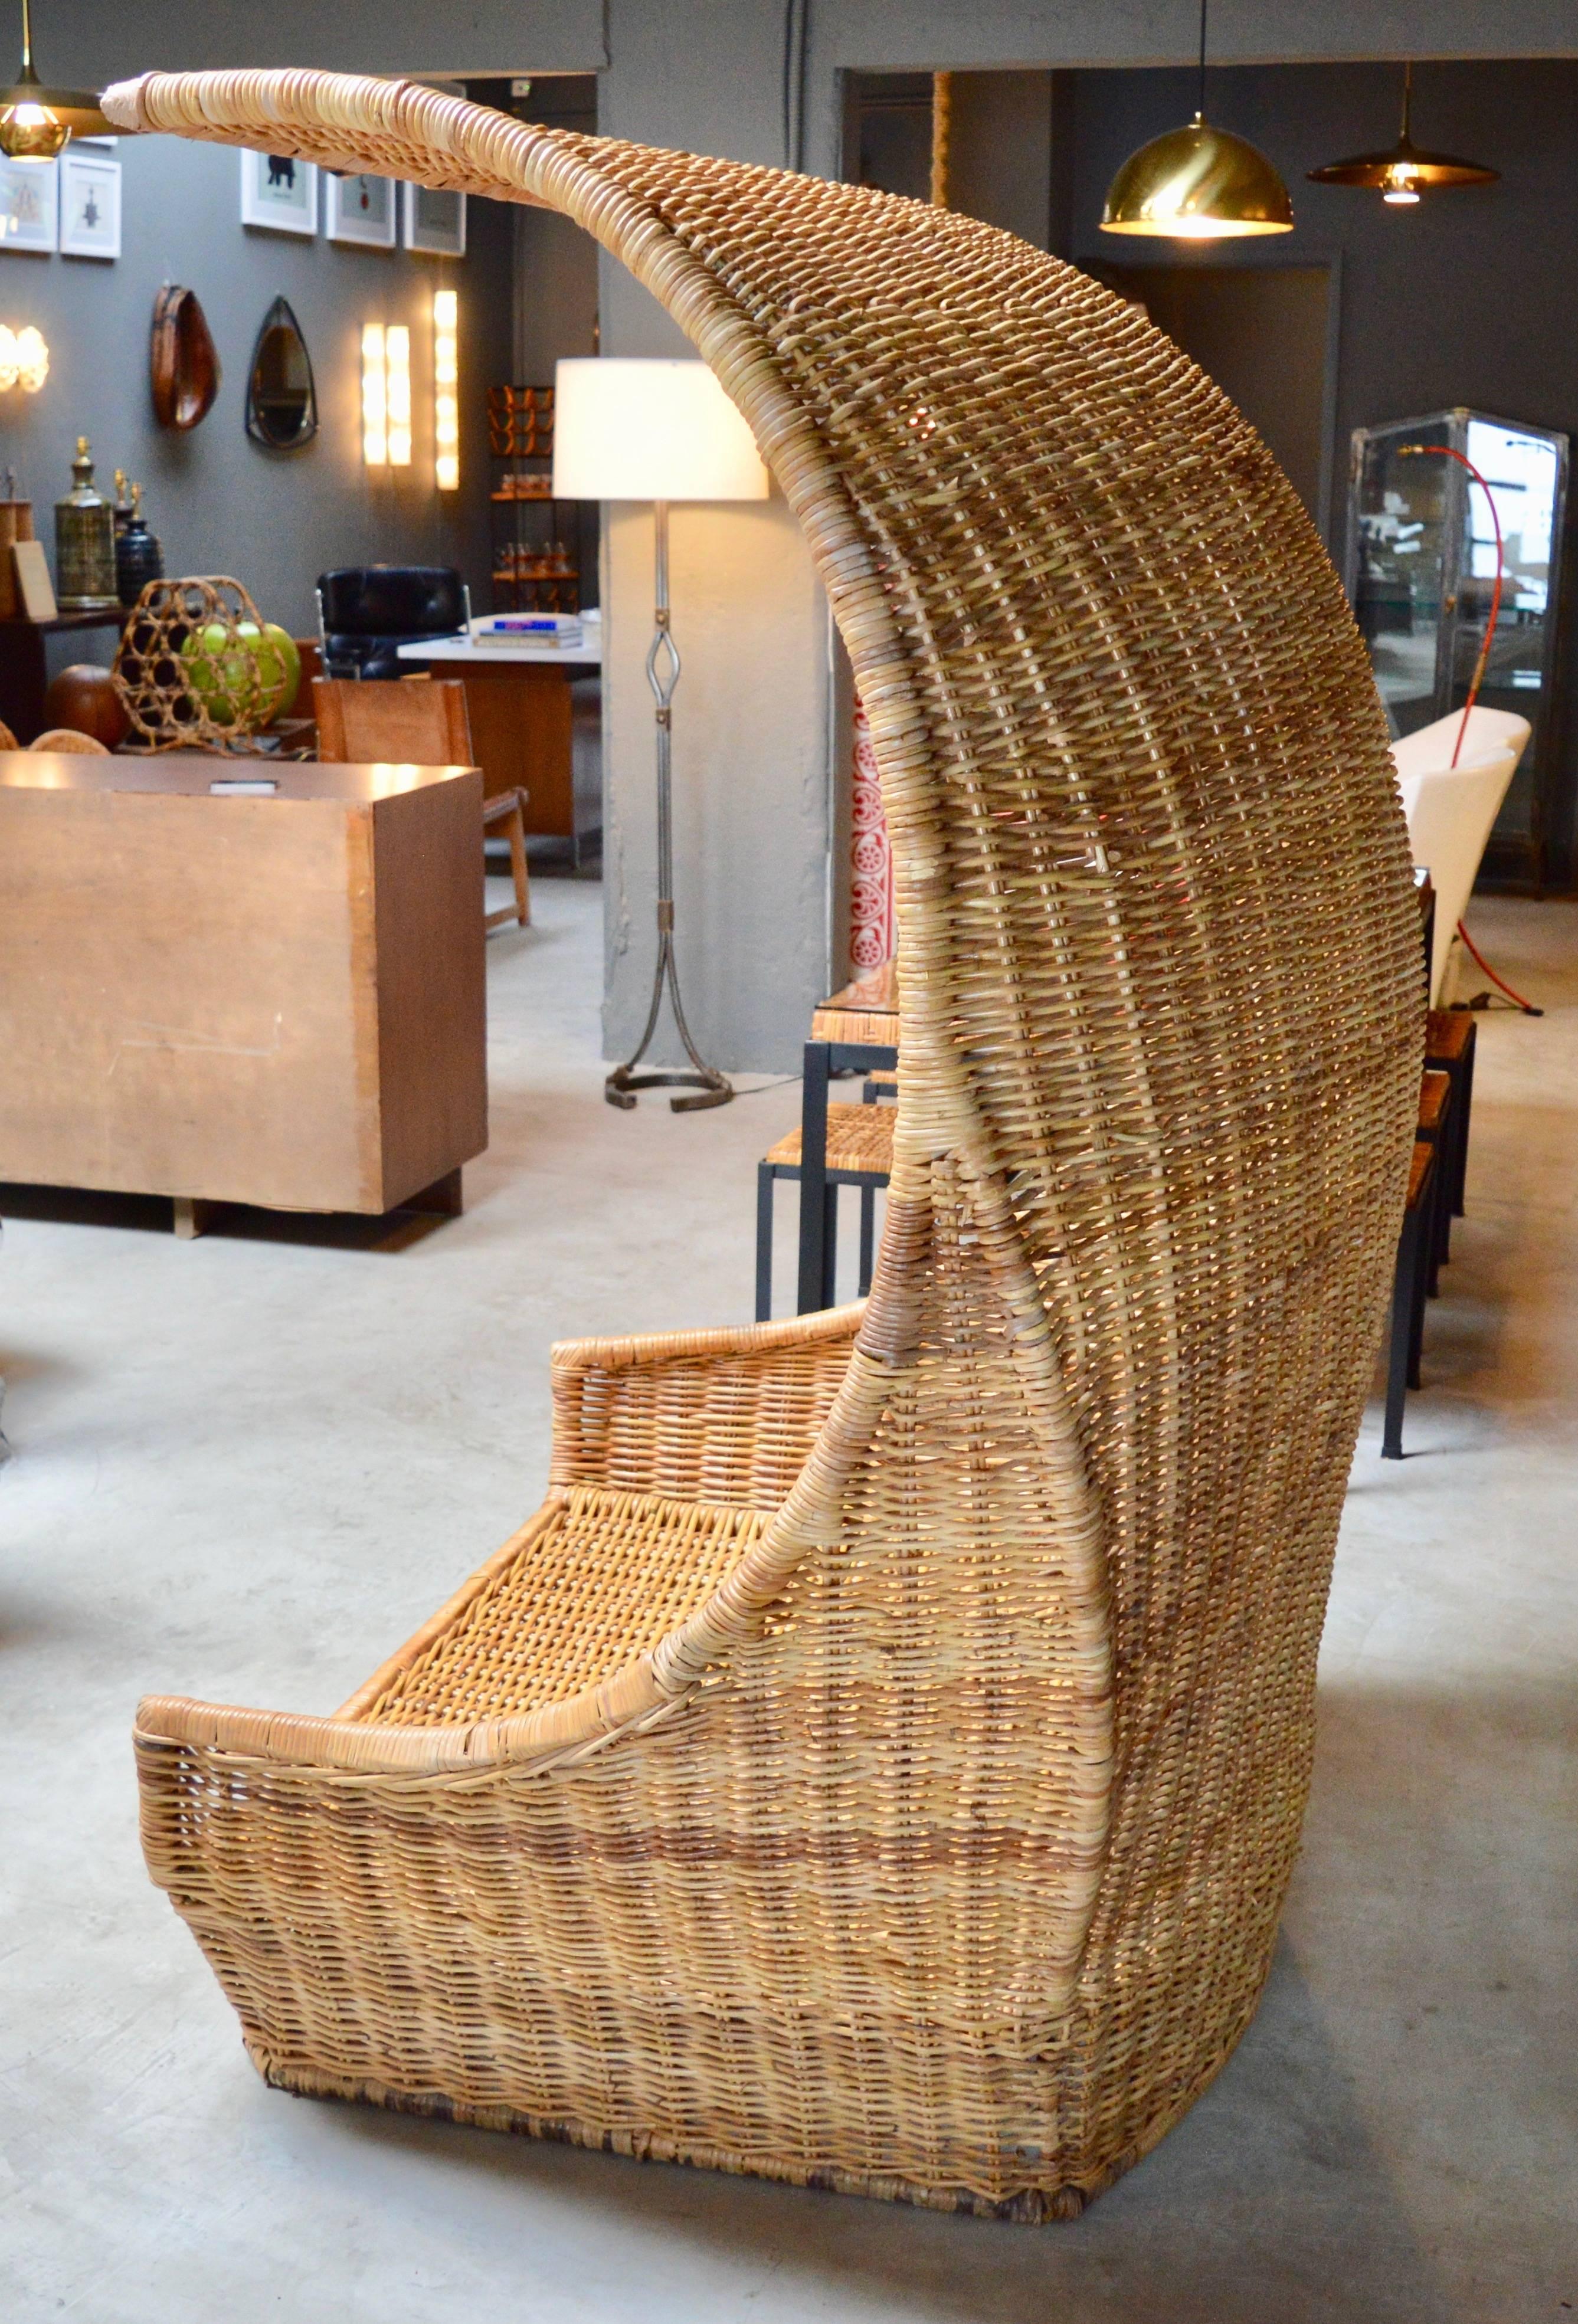 American Massive Hooded Rattan Canopy Chair or Loveseat